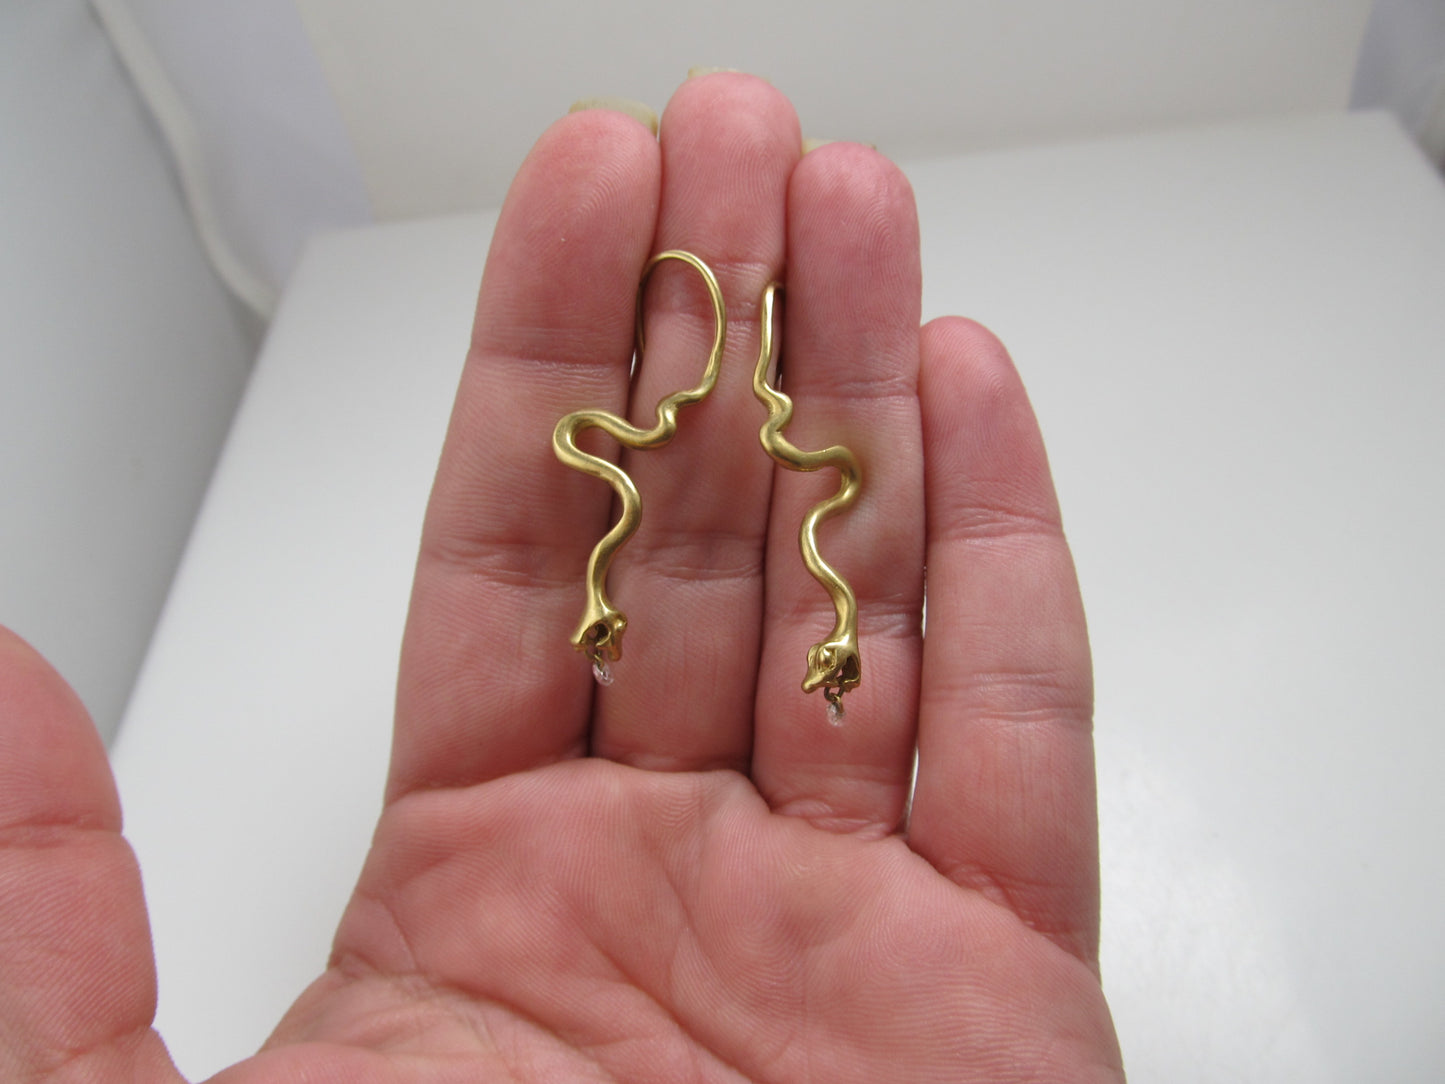 14k Yellow Gold Snake Earrings With Diamond Briolettes.